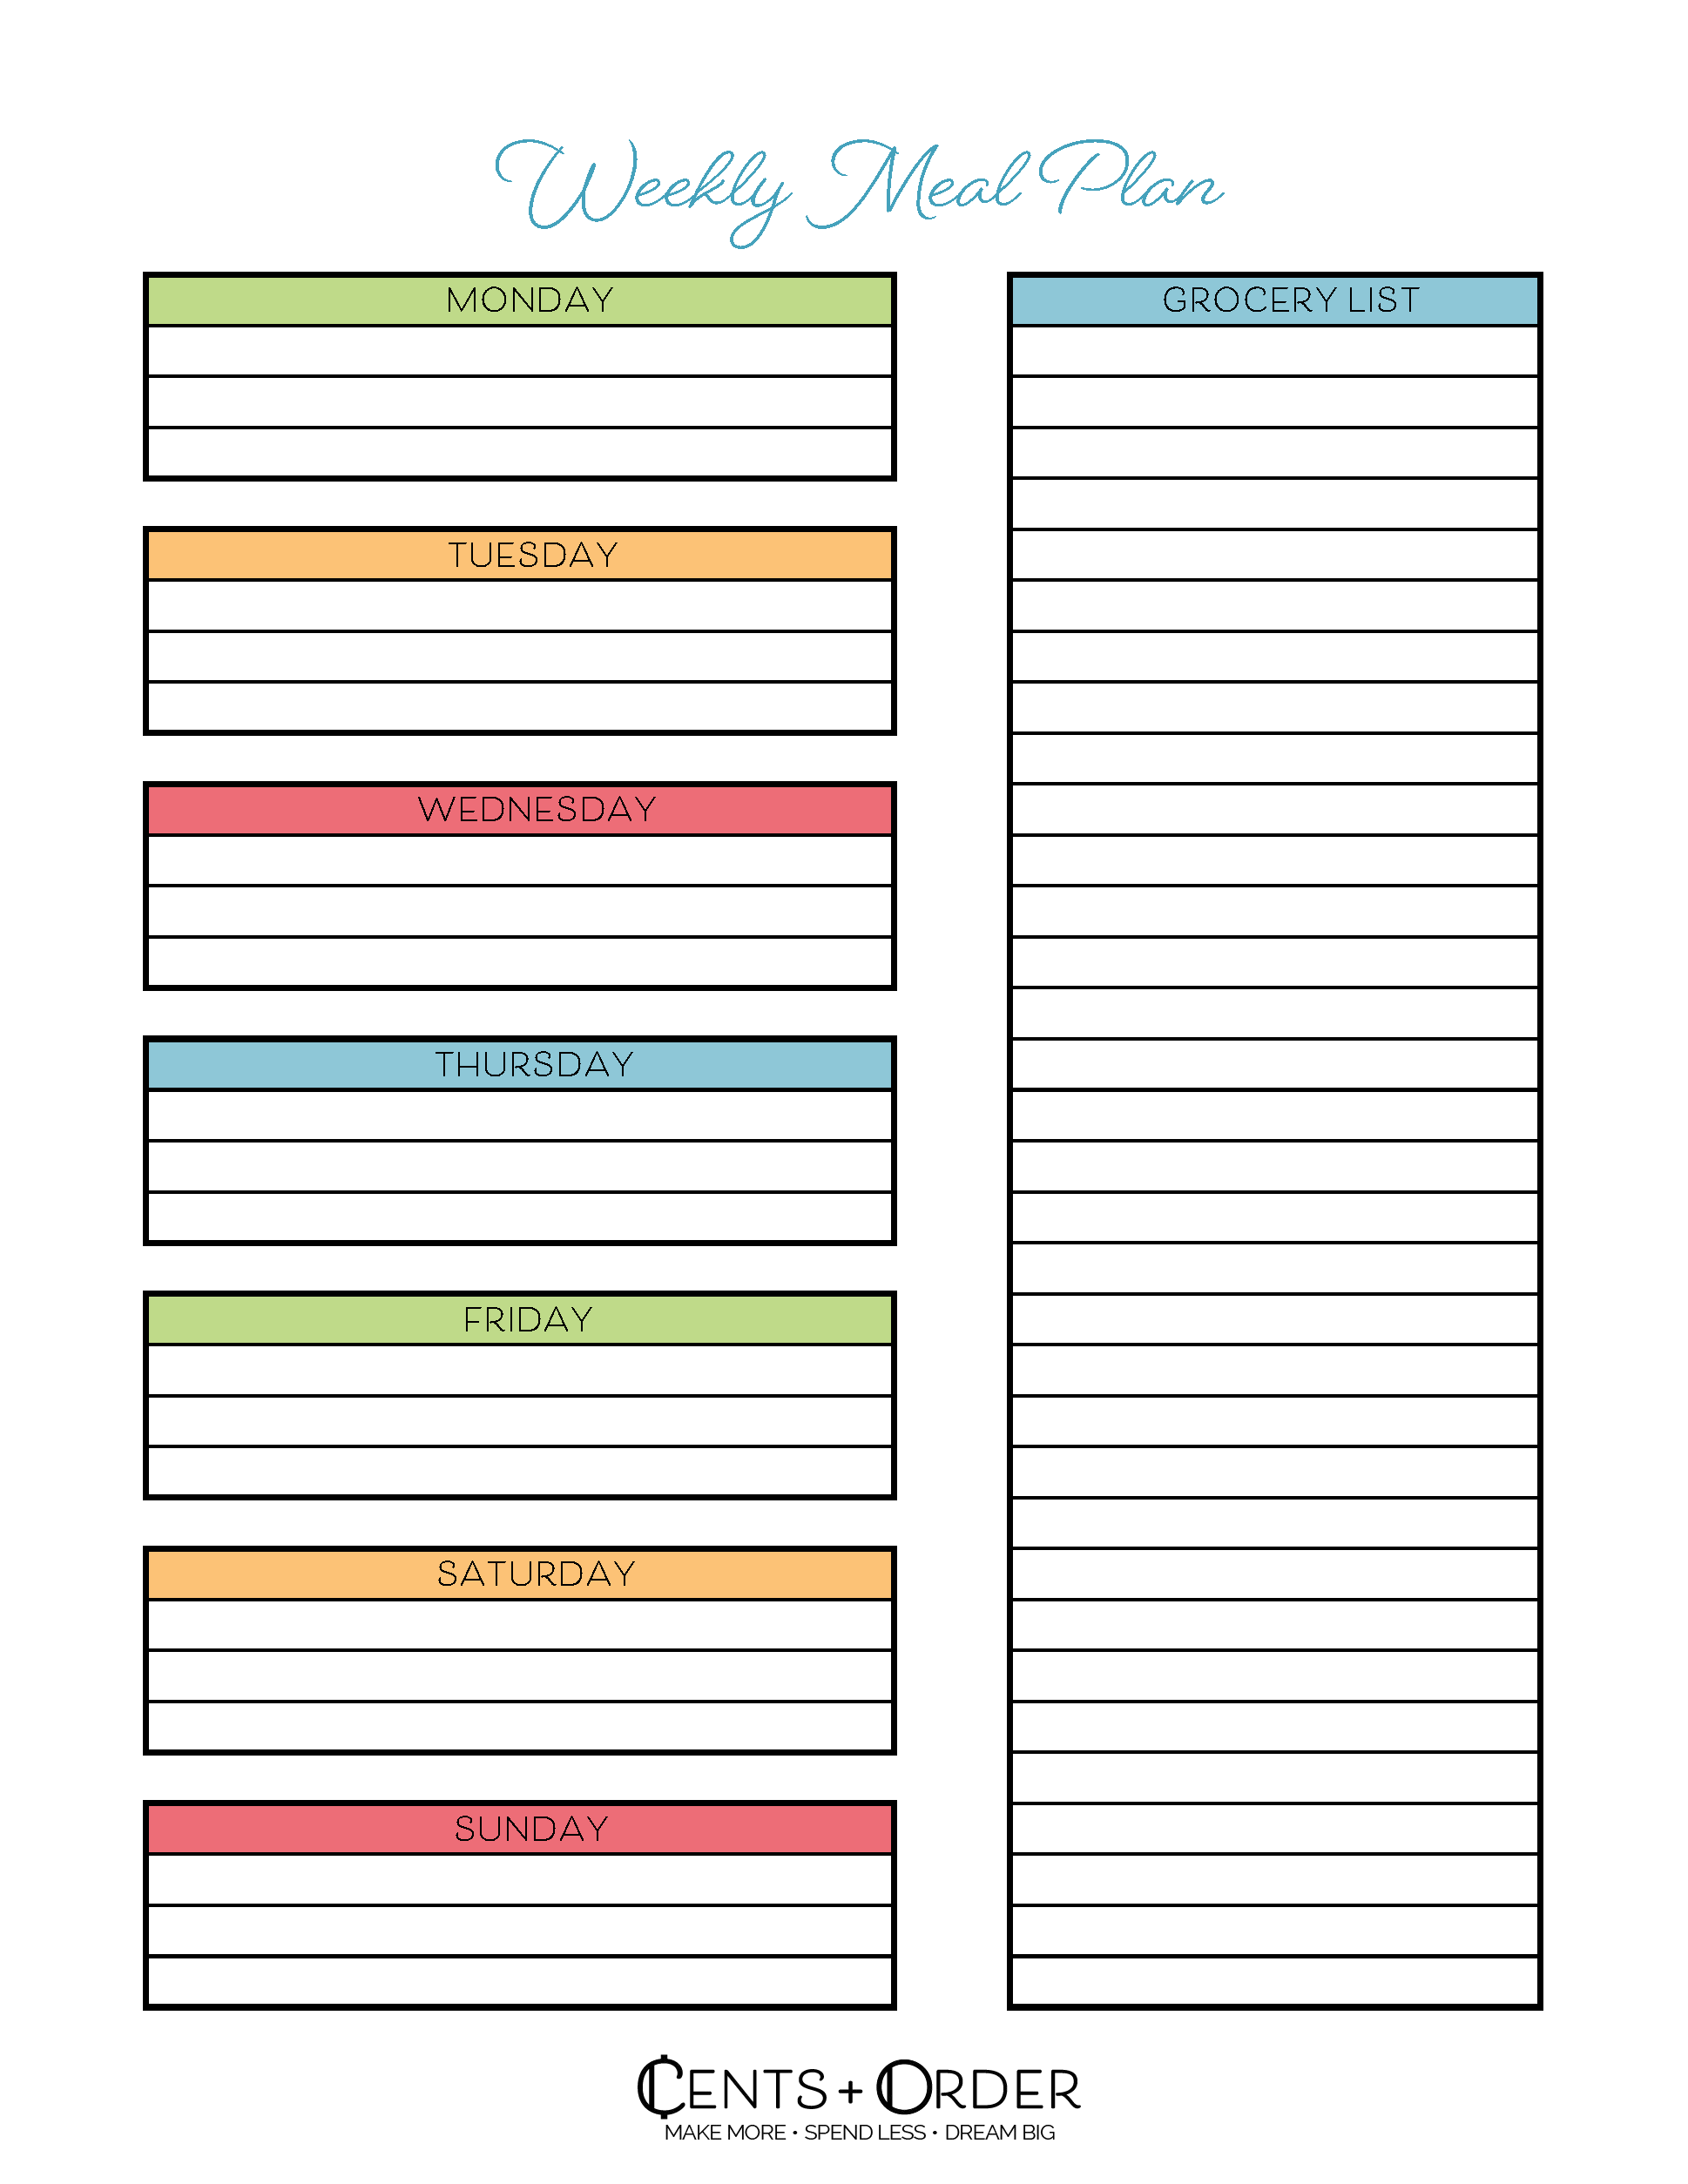 Weekly Meal Plan Template With Grocery List from www.centsandorder.com